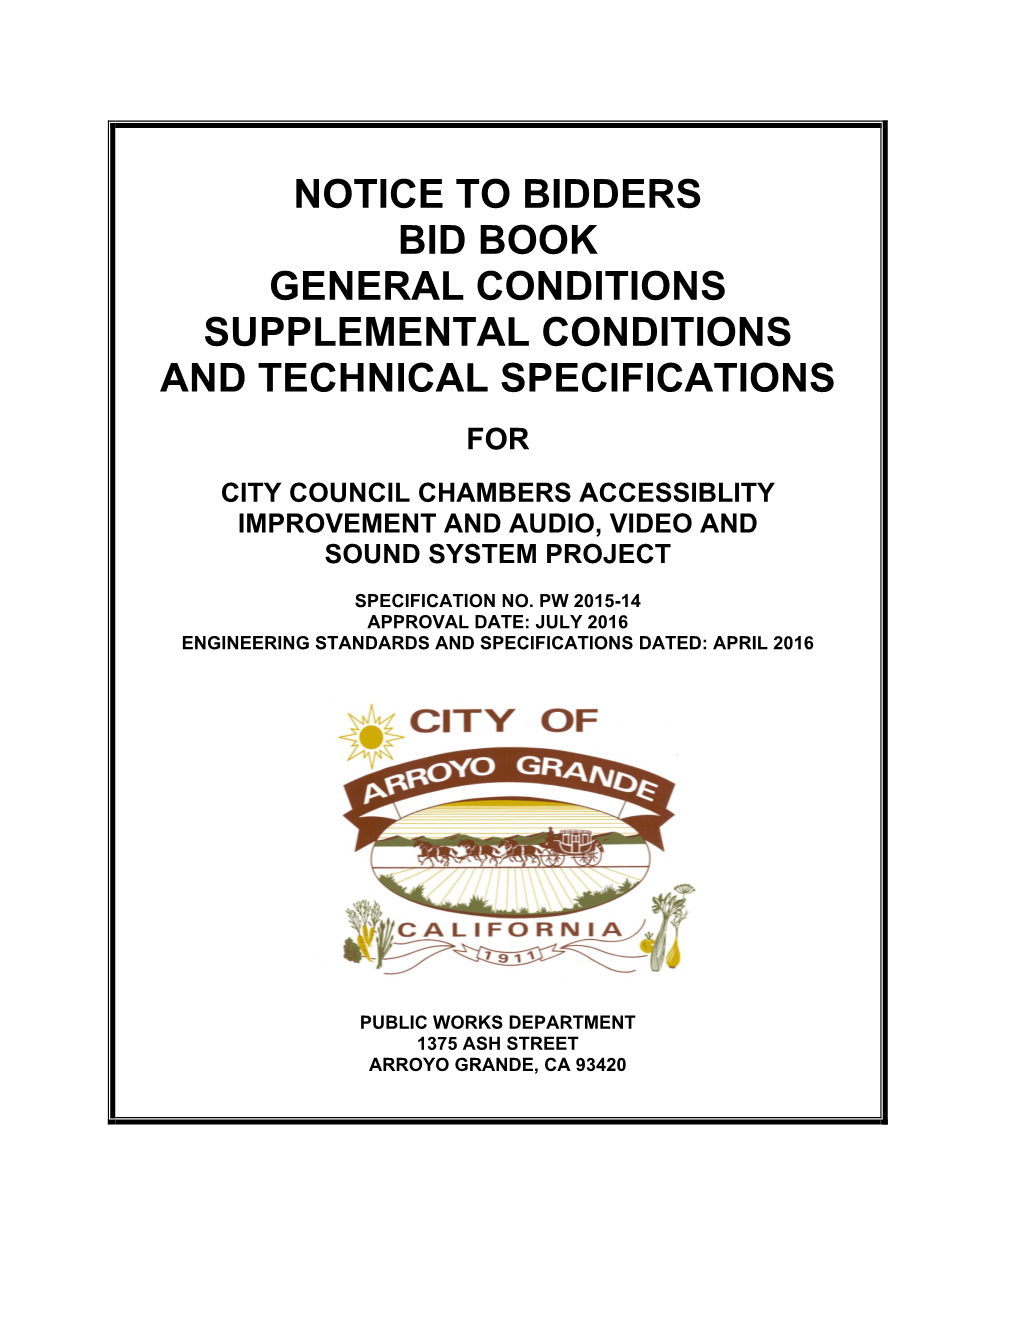 Notice to Bidders Bid Book General Conditions Supplemental Conditions and Technical Specifications